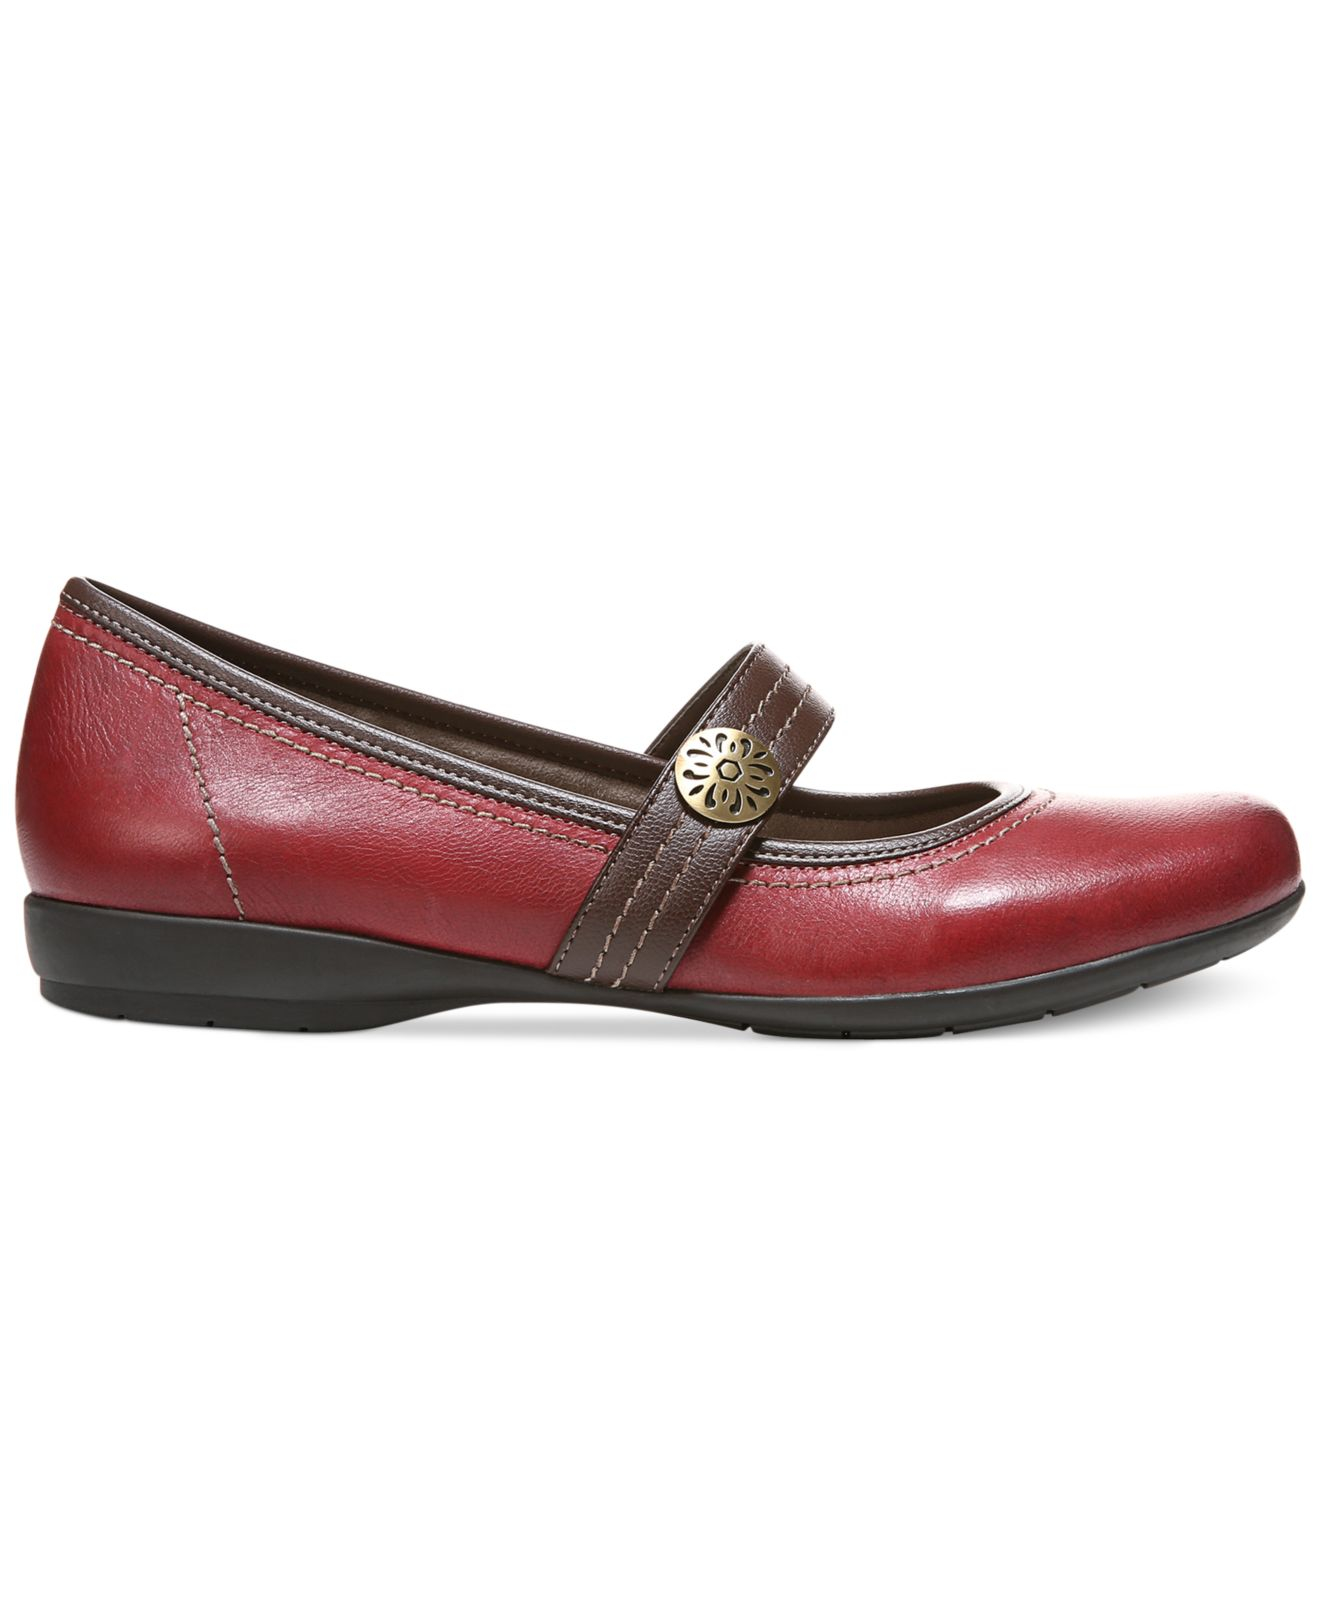 Lyst - Naturalizer Garrison Flats in Red